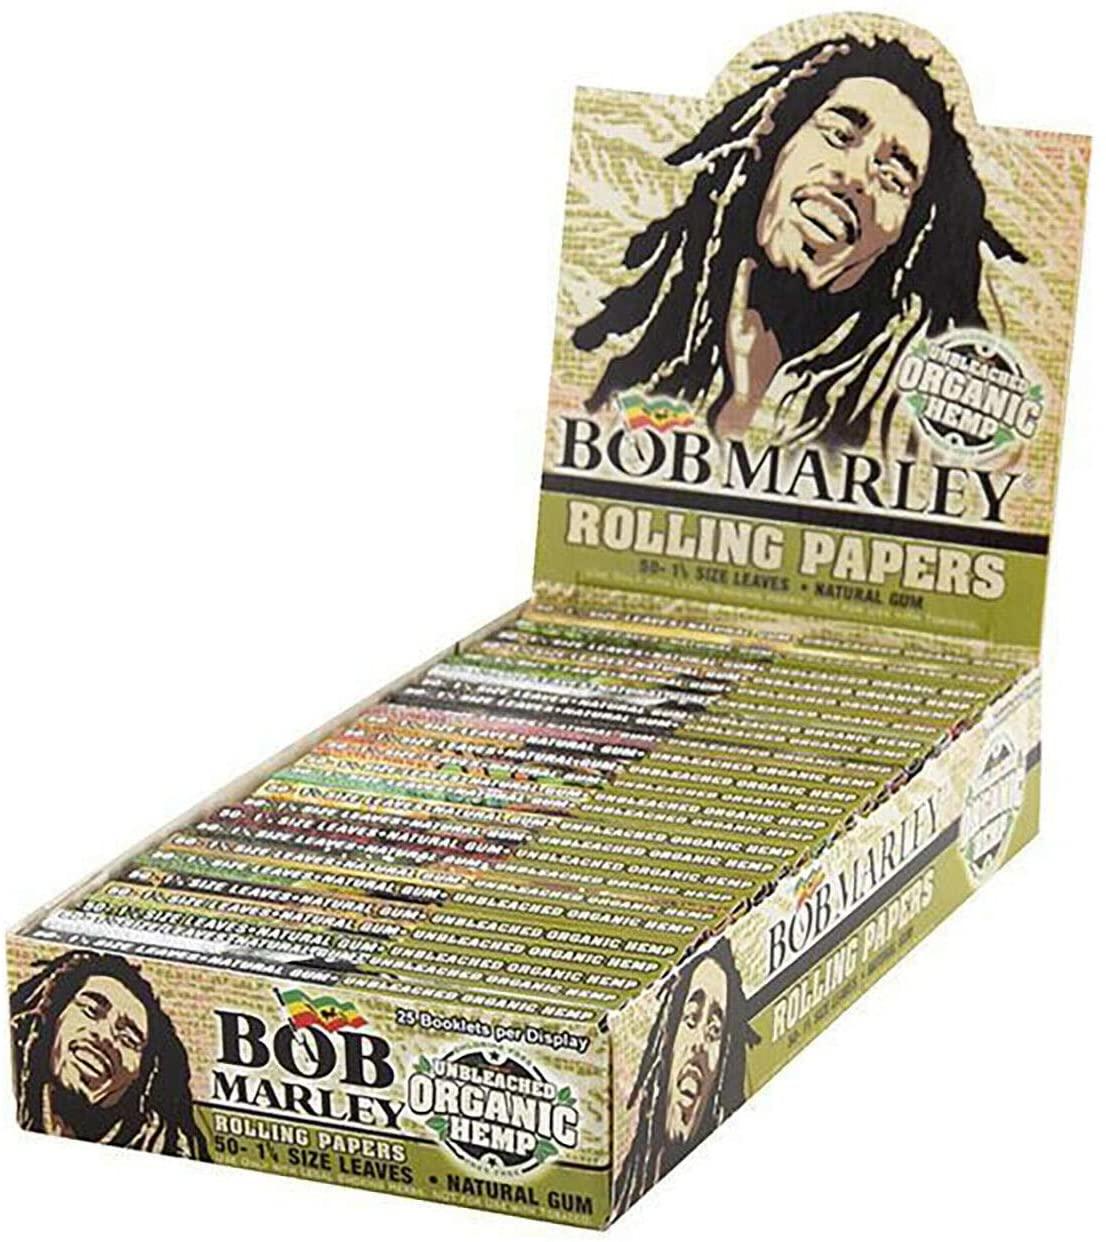 Bob Marley Unbleached Organic Pure Hemp 1-1-4 Size Rolling Papers